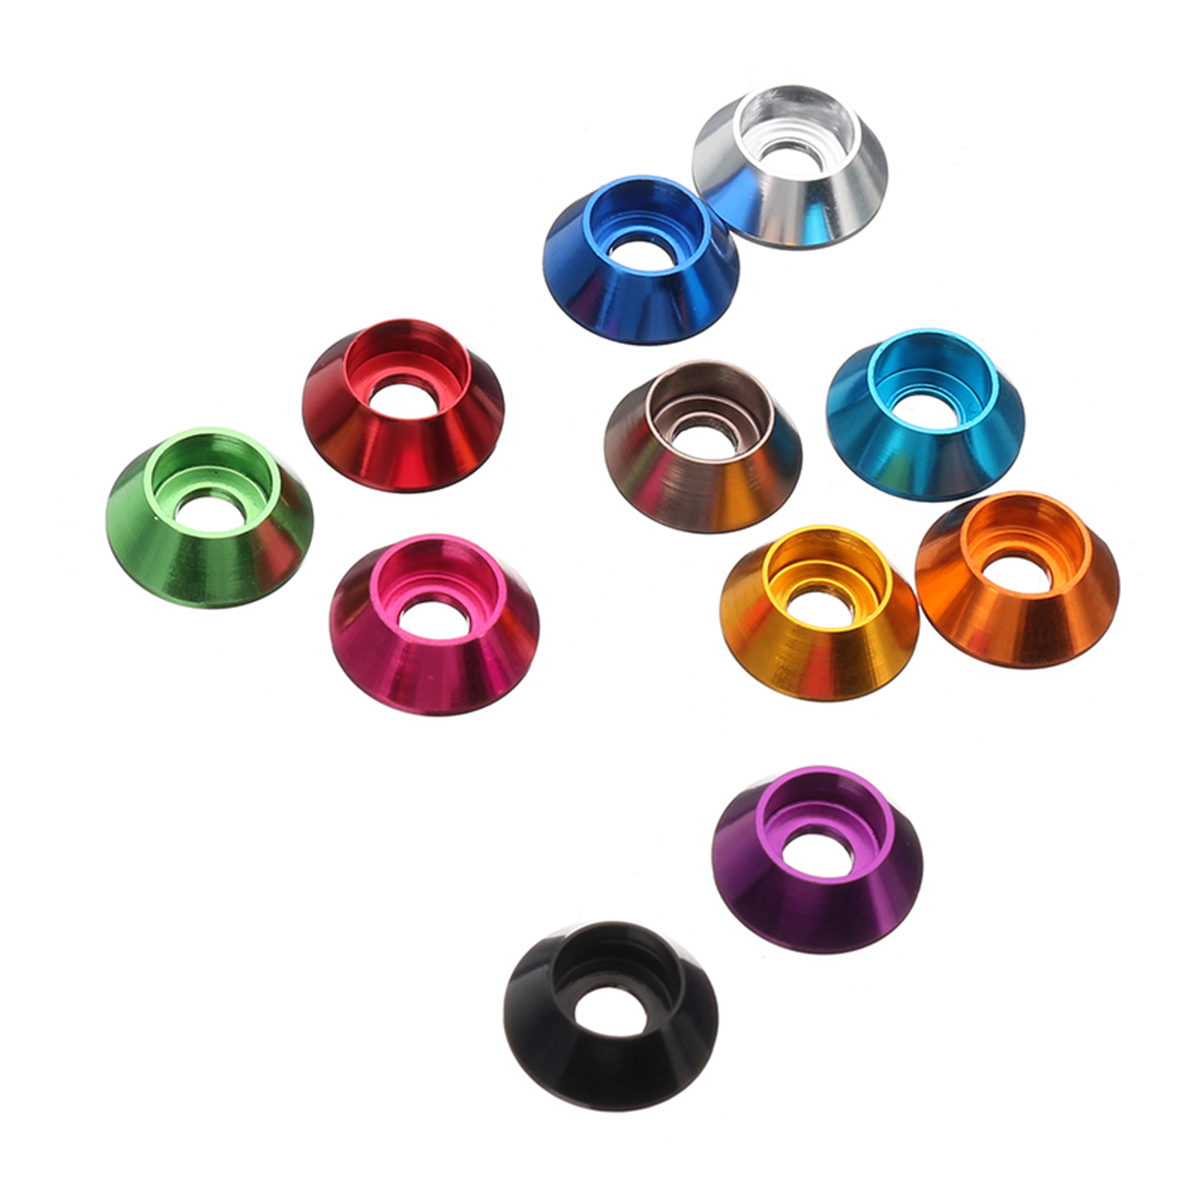 Sulevetrade-M5AN2-10Pcs-M5-Cup-Head-Hex-Screw-Gasket-Washer-Nuts-Aluminum-Alloy-Multicolor-1535744-3